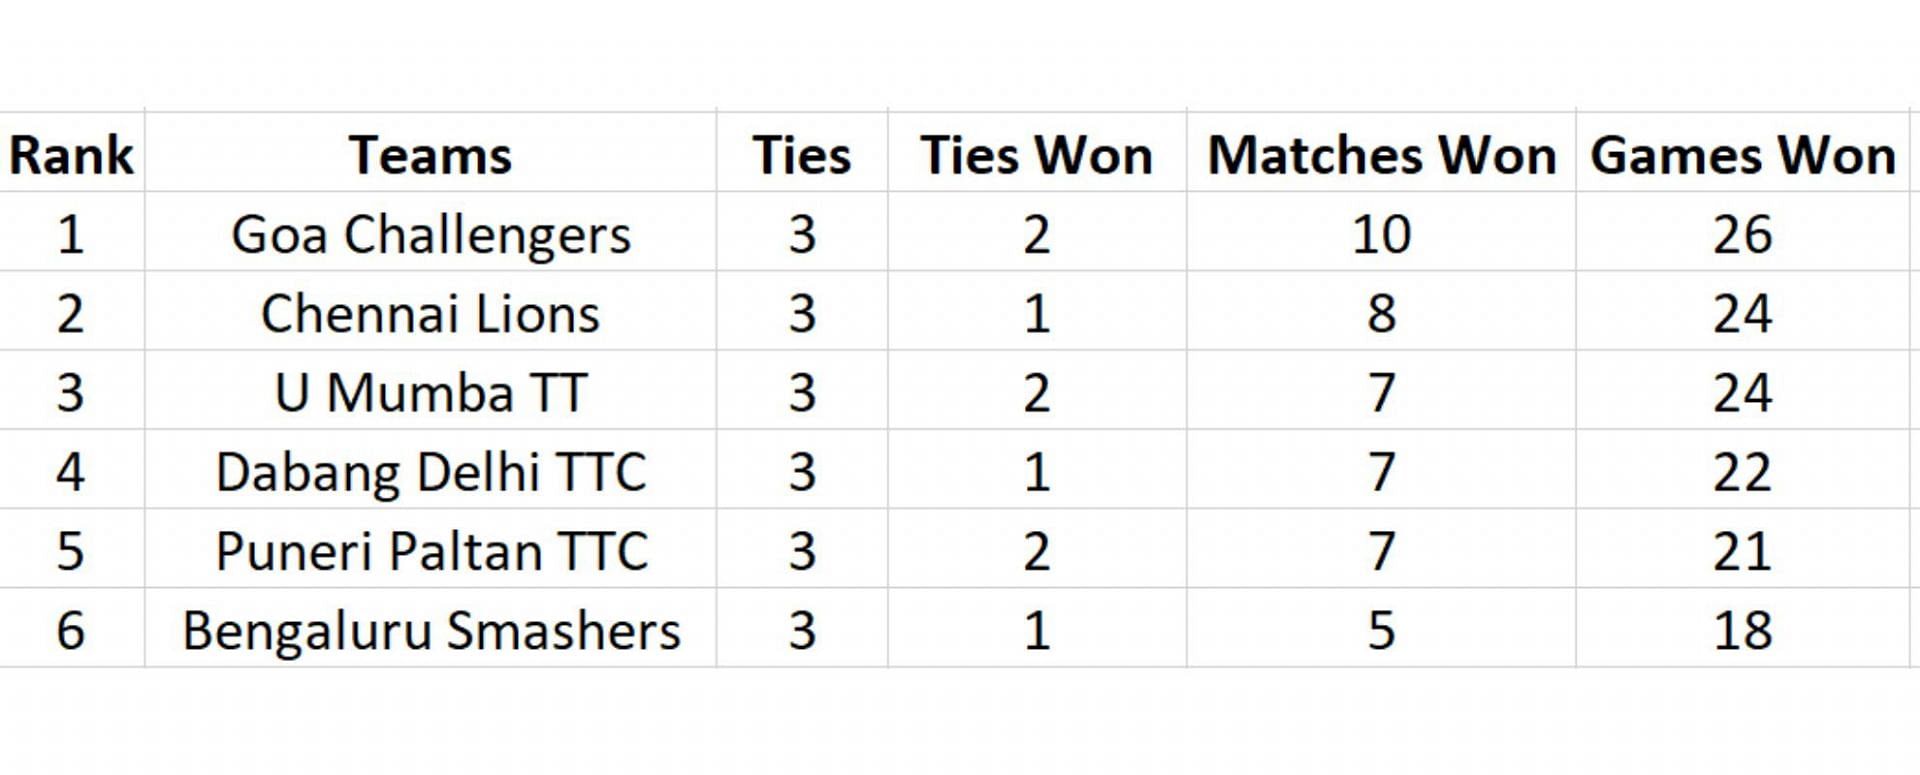 Ultimate Table Tennis League table after Match 9